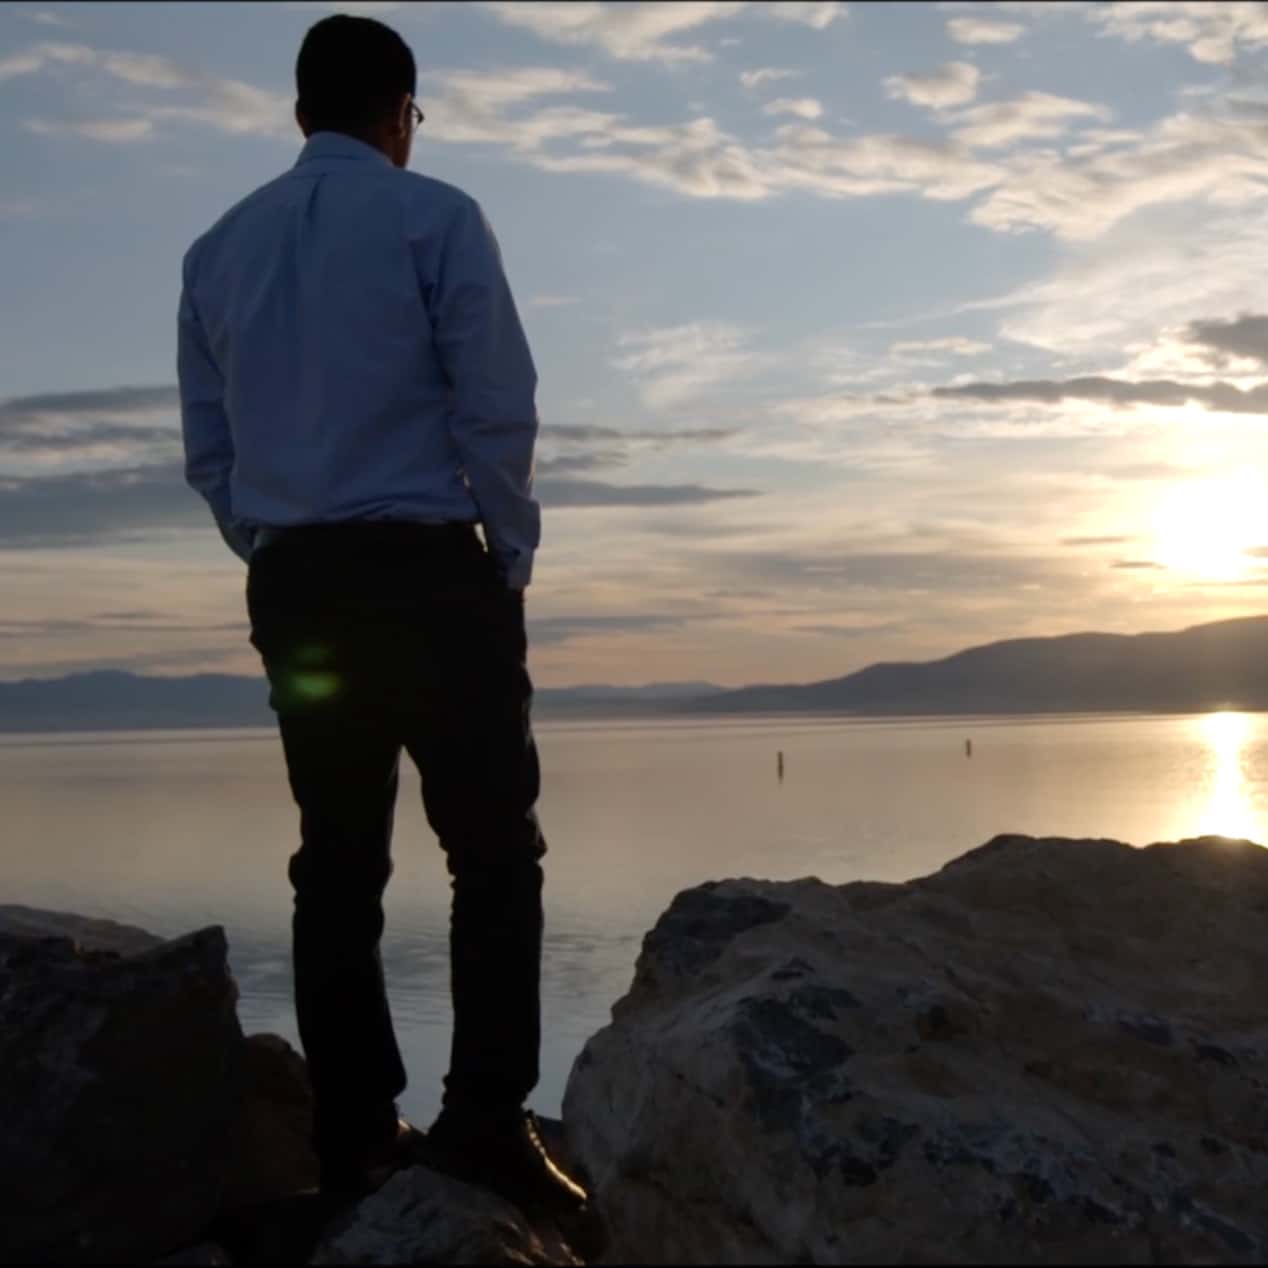 A person stands on a rocky shoreline, facing a calm body of water during sunset. The sky is filled with a mix of clouds and the sun is partially hidden behind distant mountains, casting a golden reflection on the water.